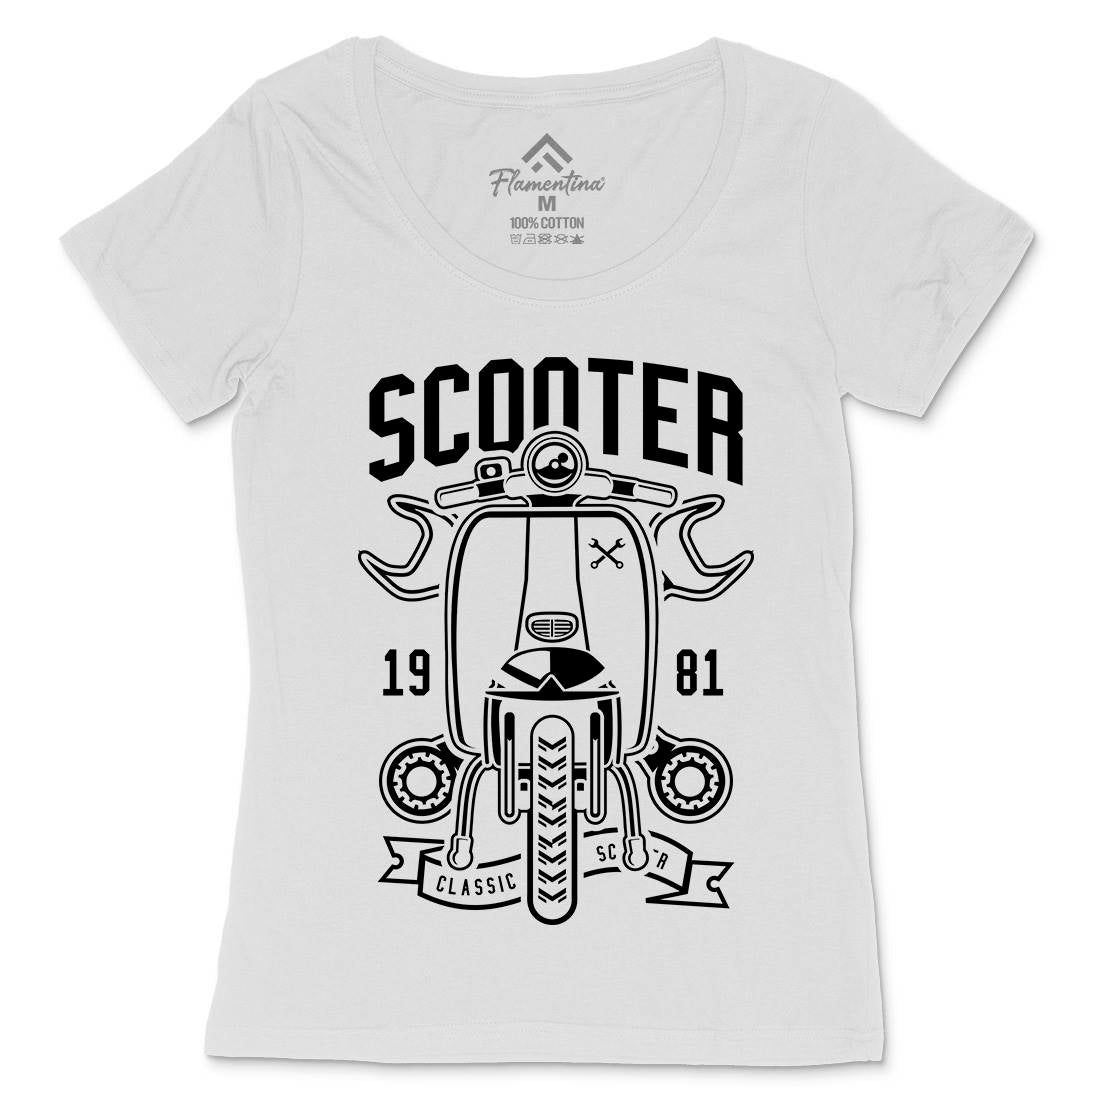 Scooter Classic Womens Scoop Neck T-Shirt Motorcycles B618